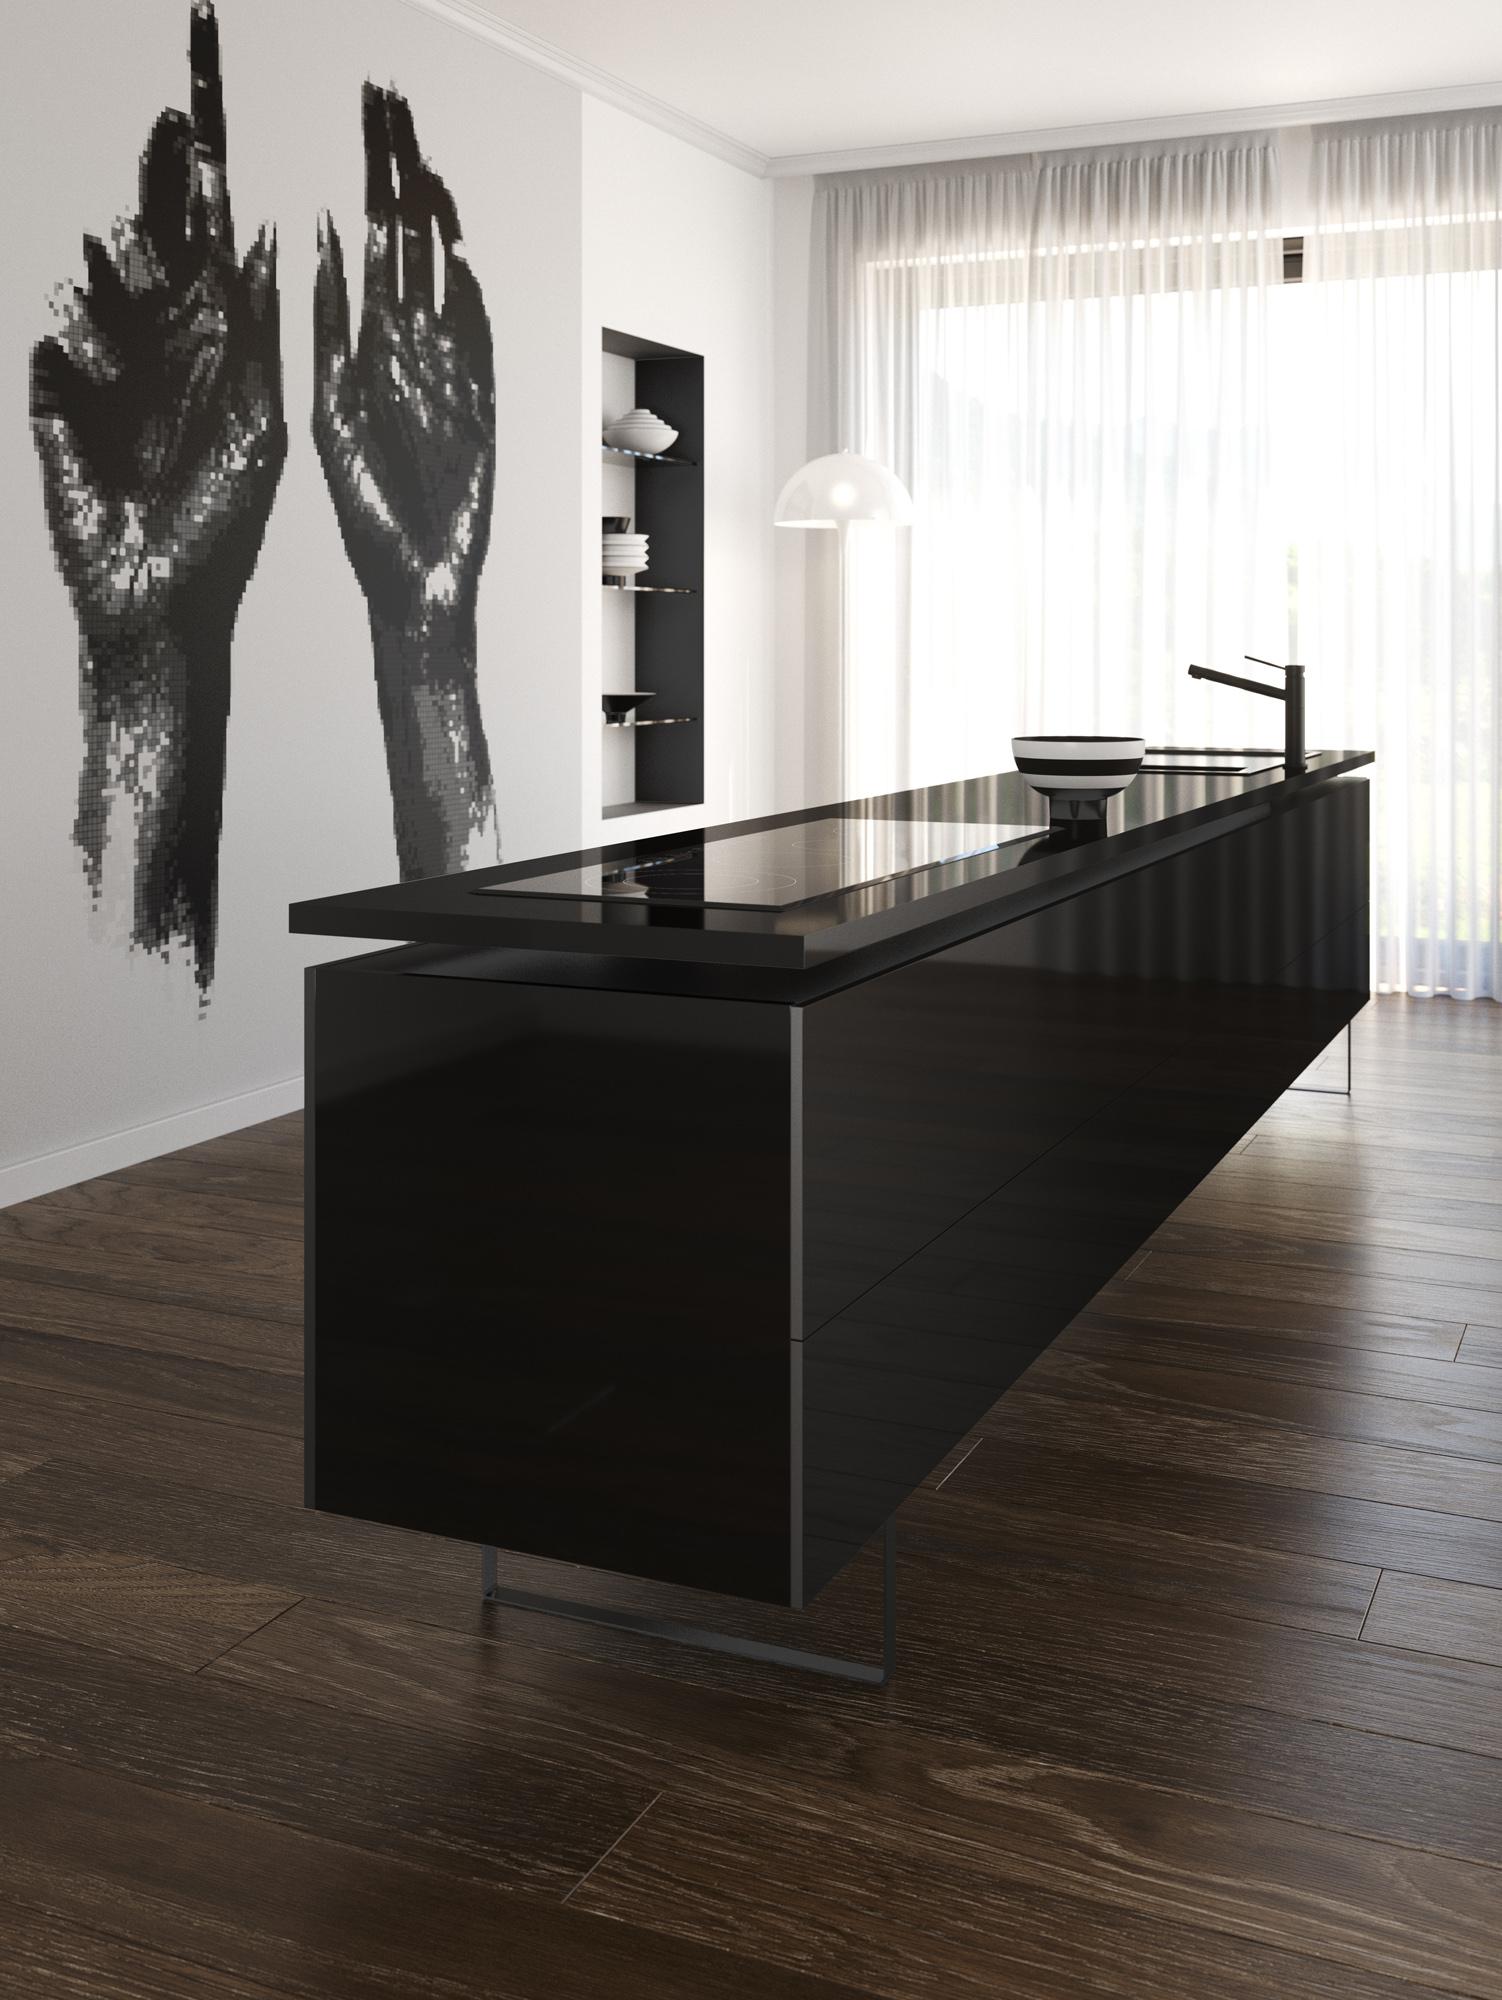 Iconic Black kitchen countertop from Silestone by Cosentino